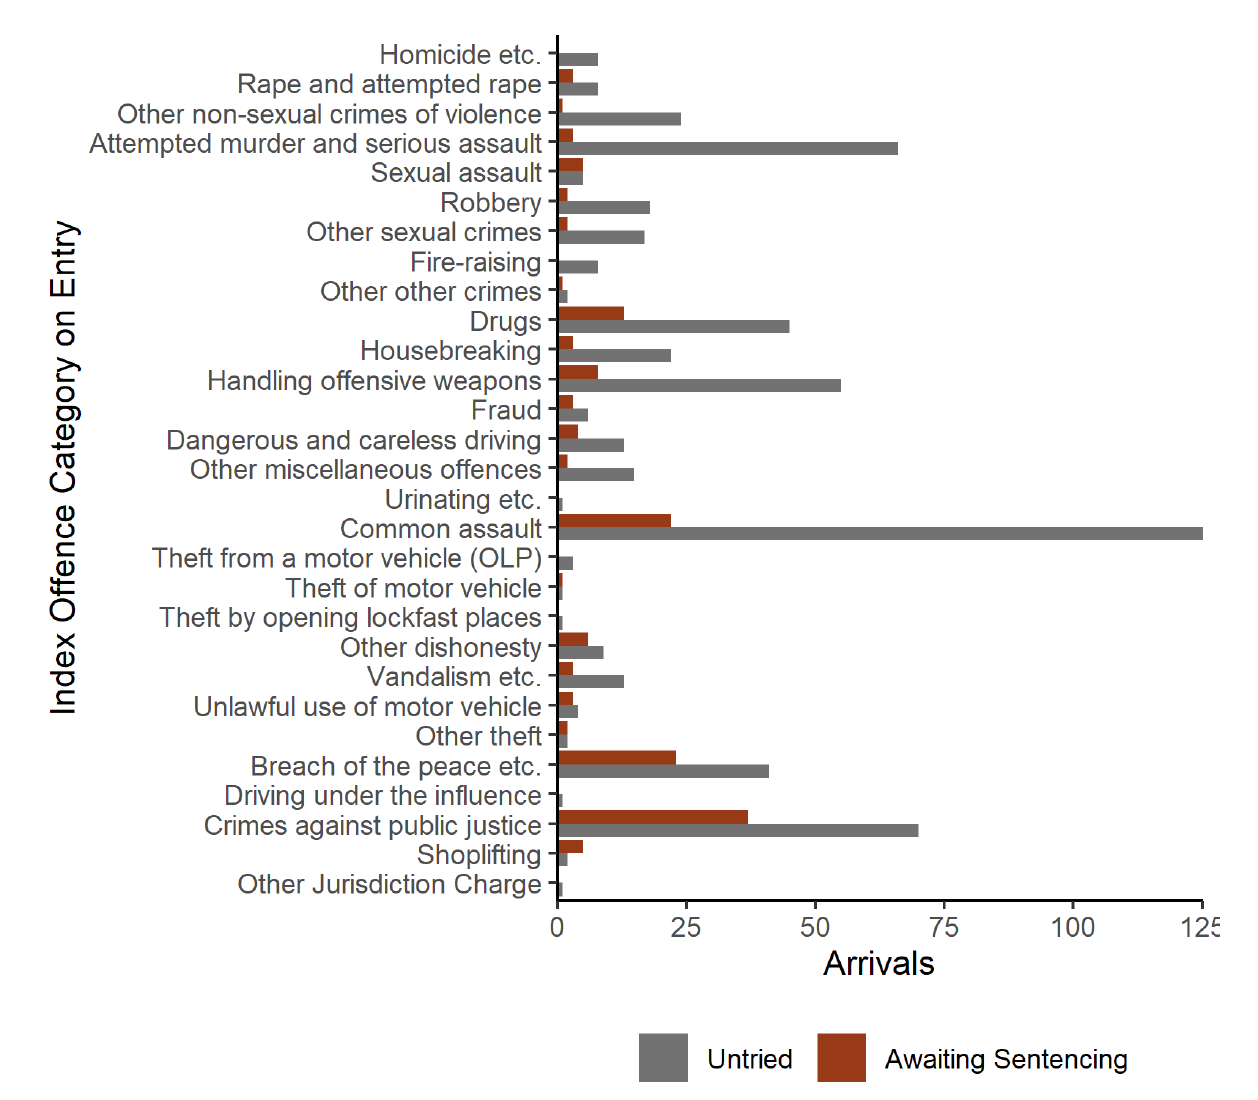 Bar chart showing remand arrivals by offence type, with the highest number of (Untried) arrivals for common assault.